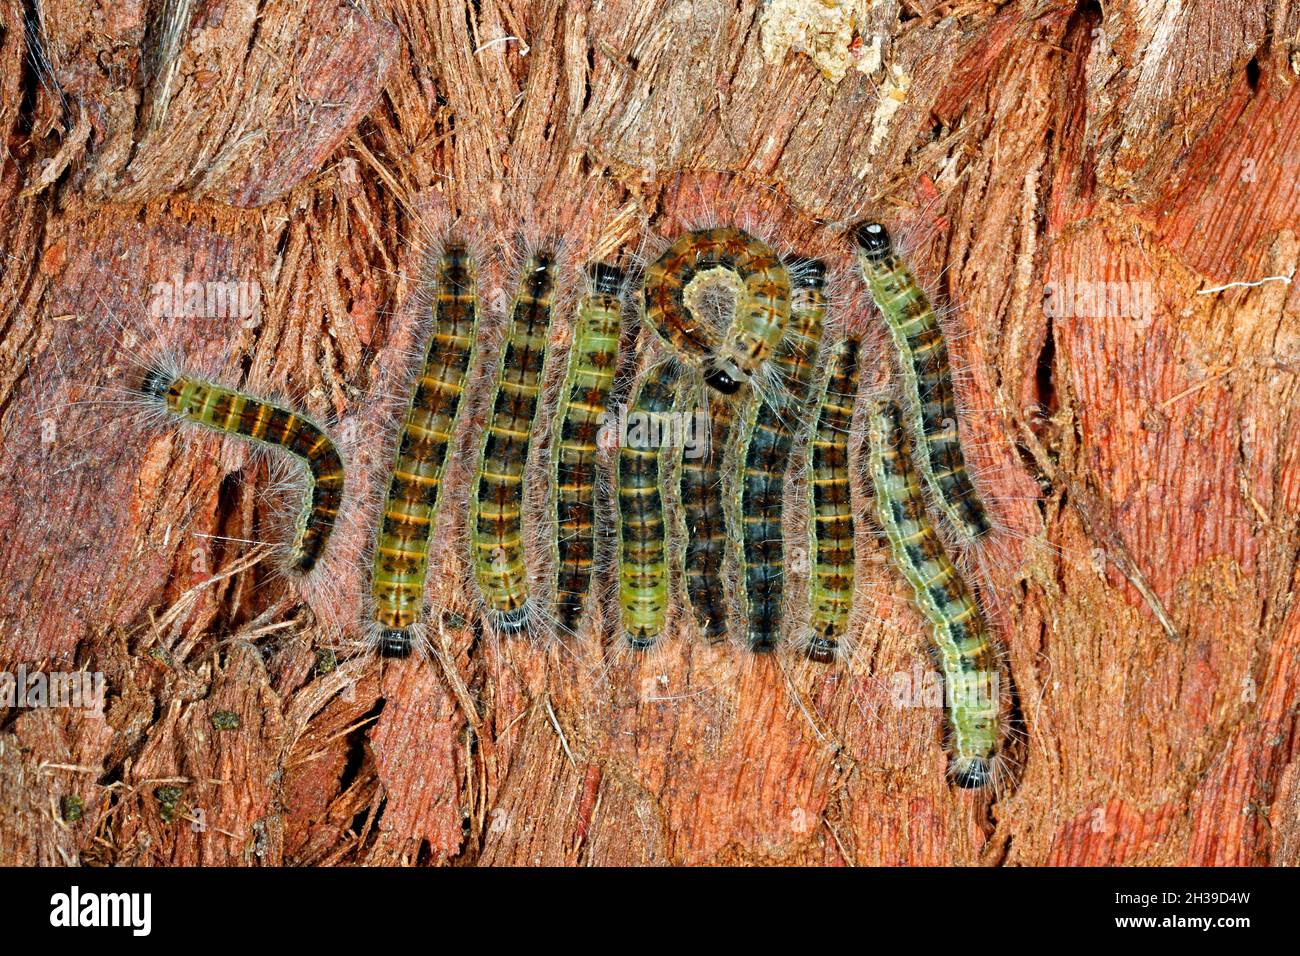 Group of Moth Caterpillars on the bark of a tree. Unknown species. Coffs Harbour, NSW, Australia Stock Photo